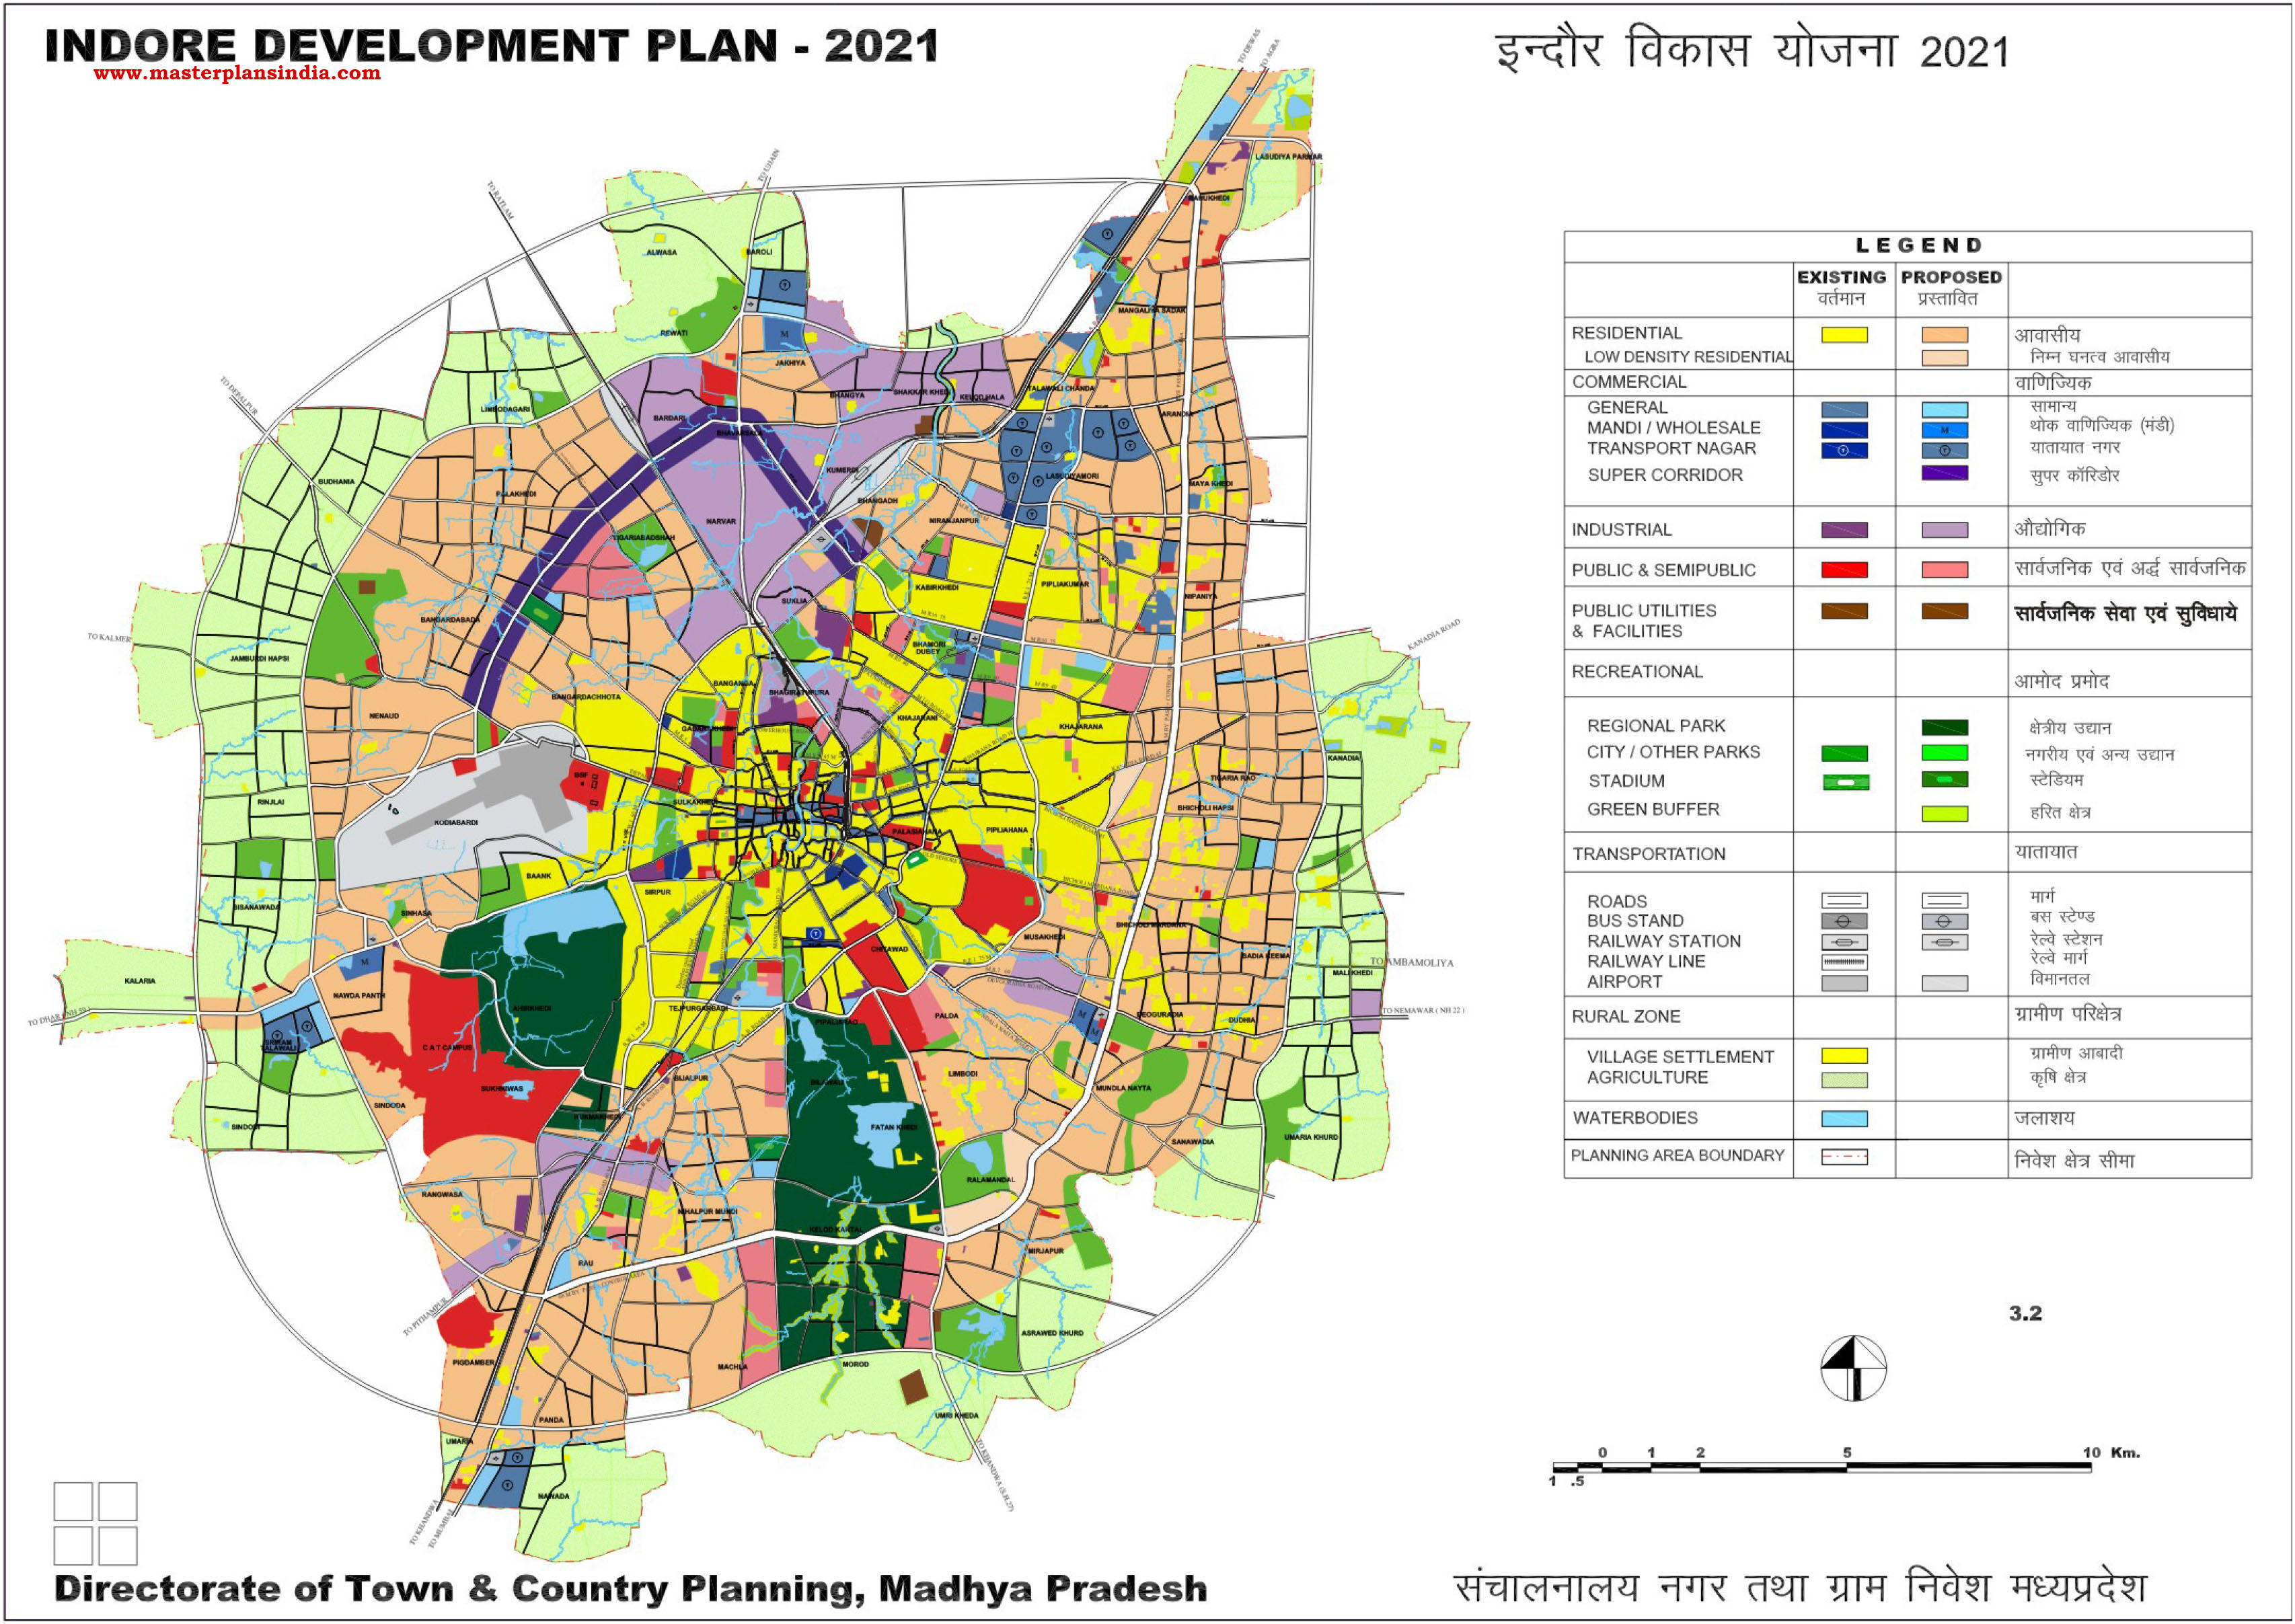 Smart City Indore Map Indore Master Development Plan 2021 Map - Master Plans India